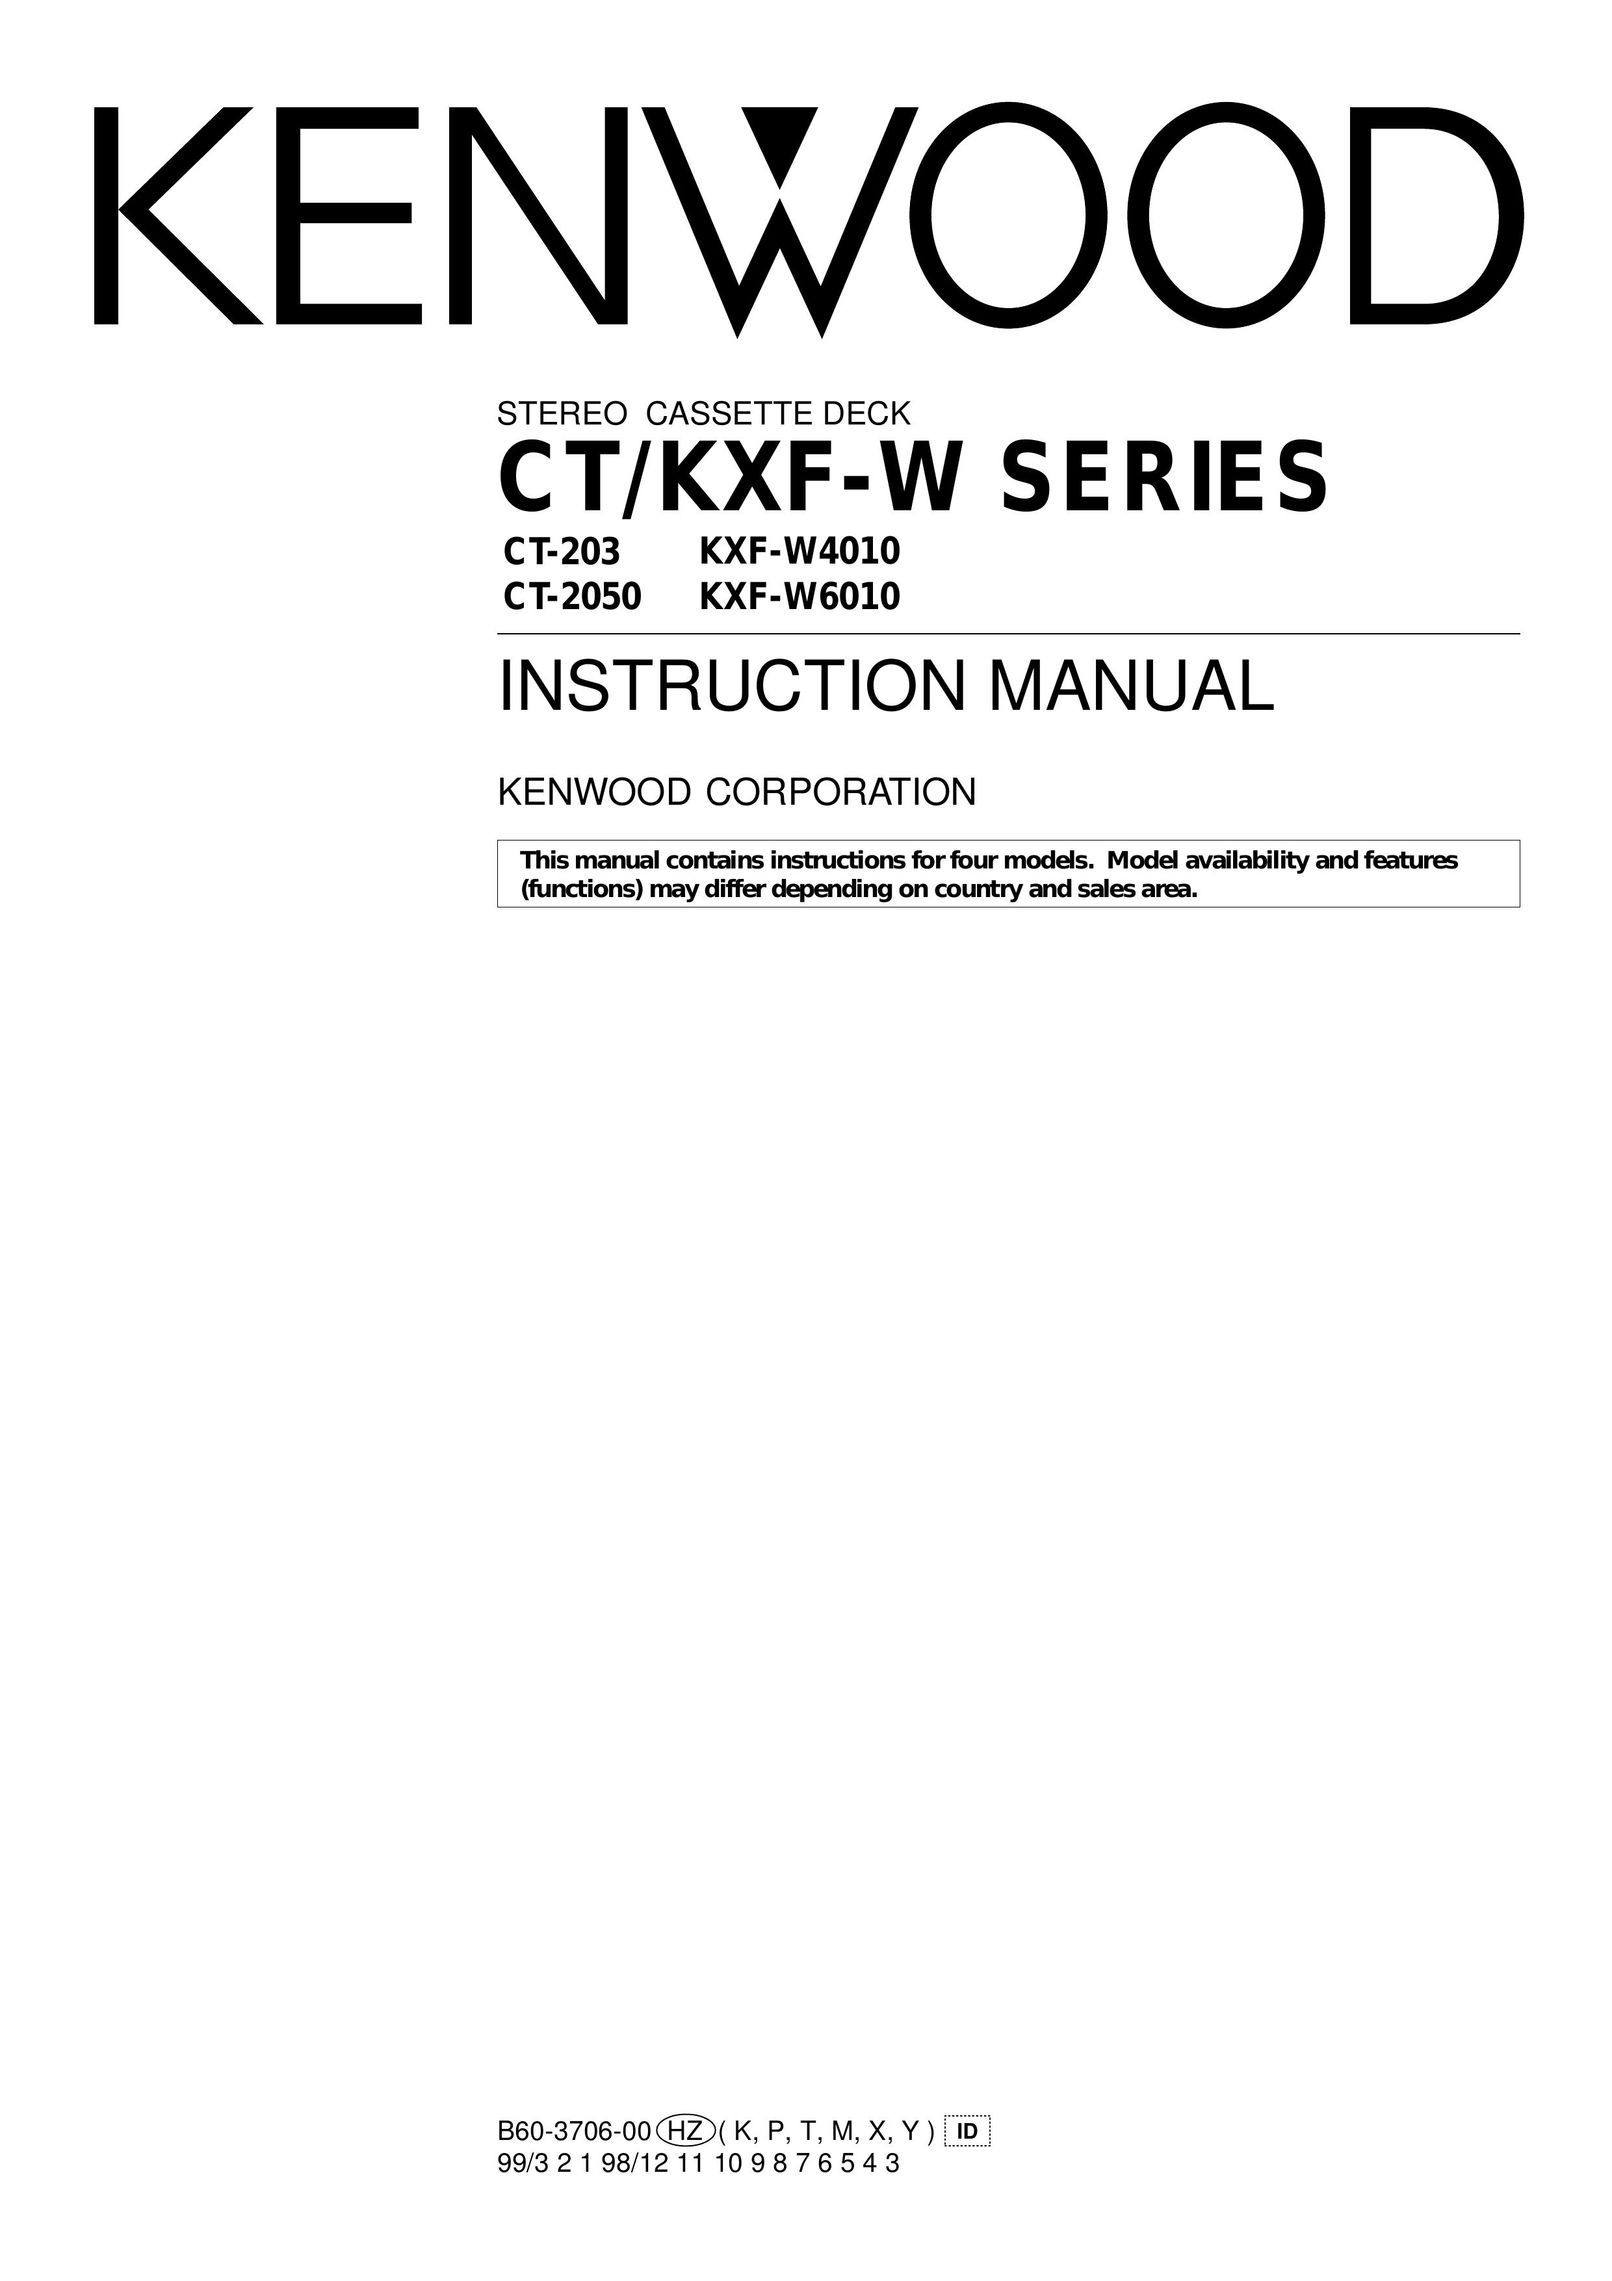 Kenwood CT-203 Stereo System User Manual